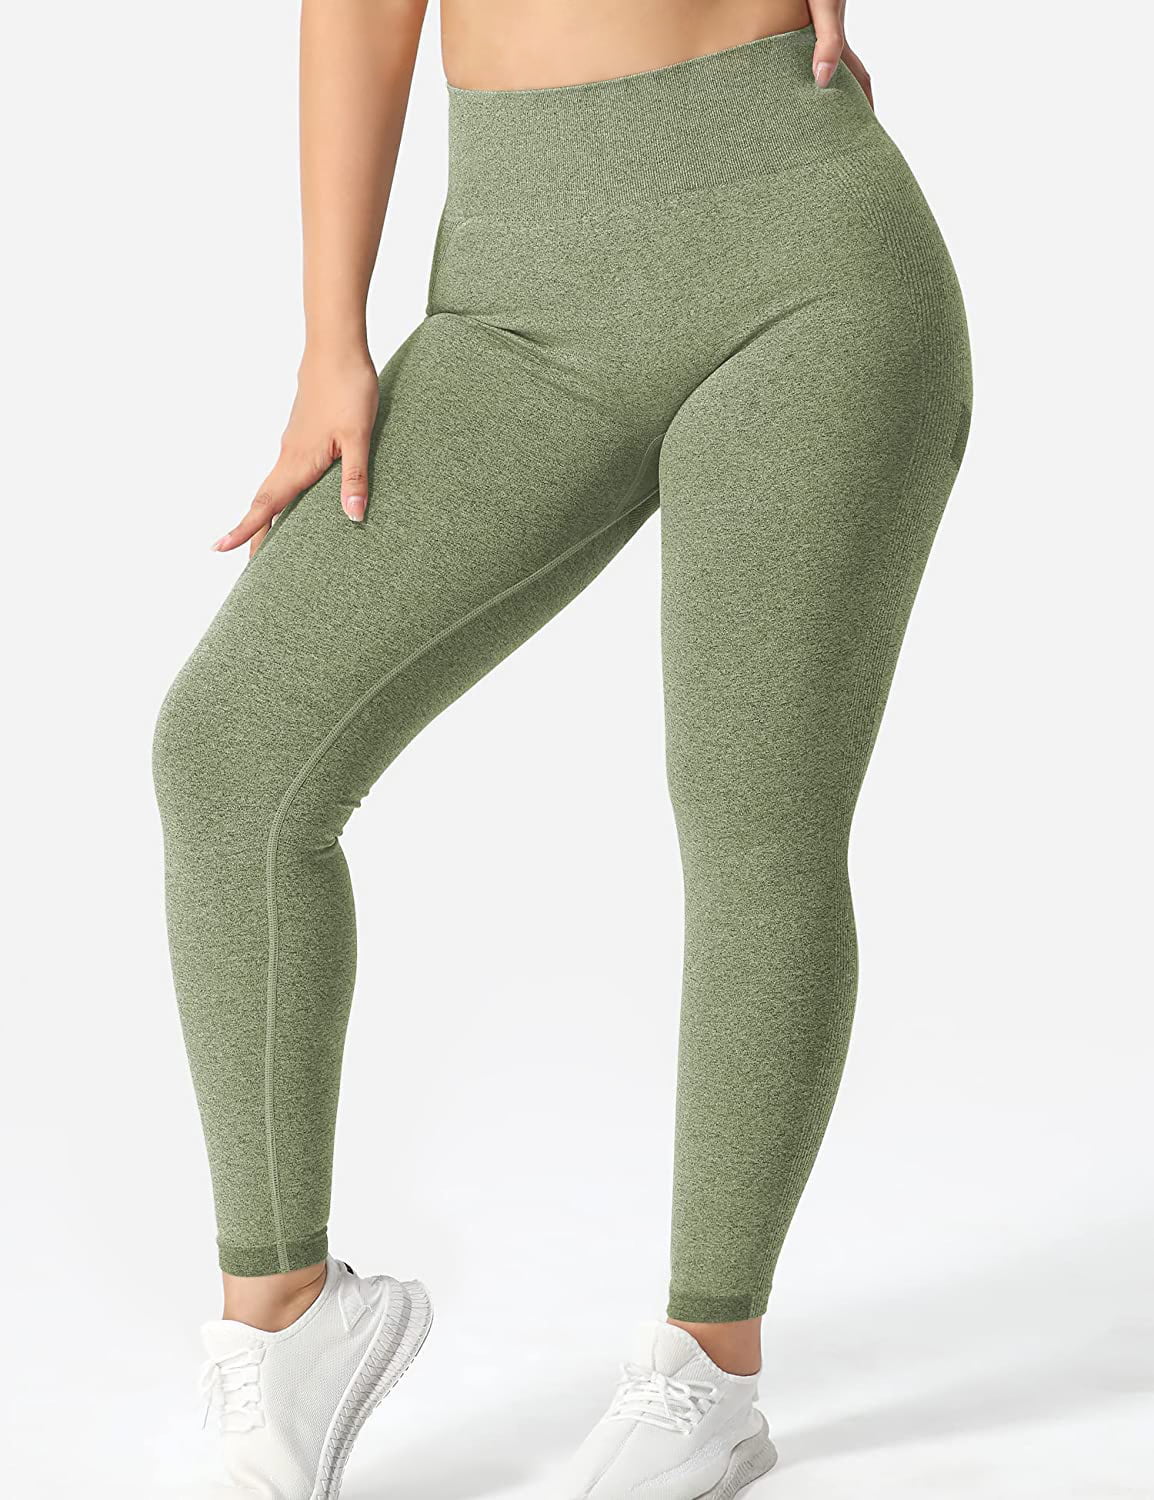 Fishfit Women's Seamless Scrunch Legging Workout Leggings for Women High  Waisted Gym Running Yoga Pants (Green, Small) at  Women's Clothing  store